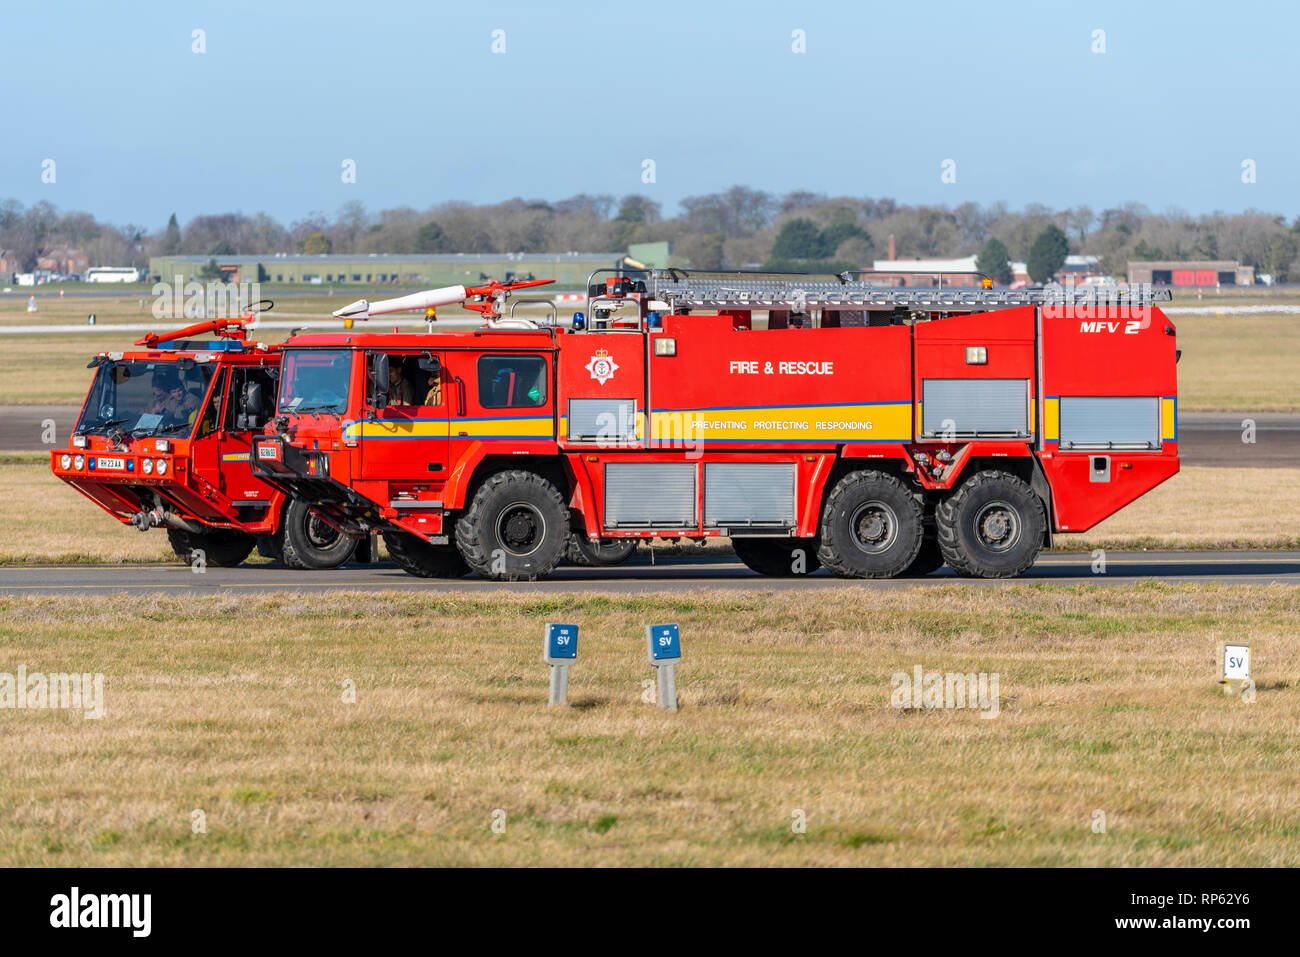 Royal Air Force Fire & Rescue emergency vehicles at RAF Marham. Fire engine. Fire truck on airfield. MFV2 Stock Photo